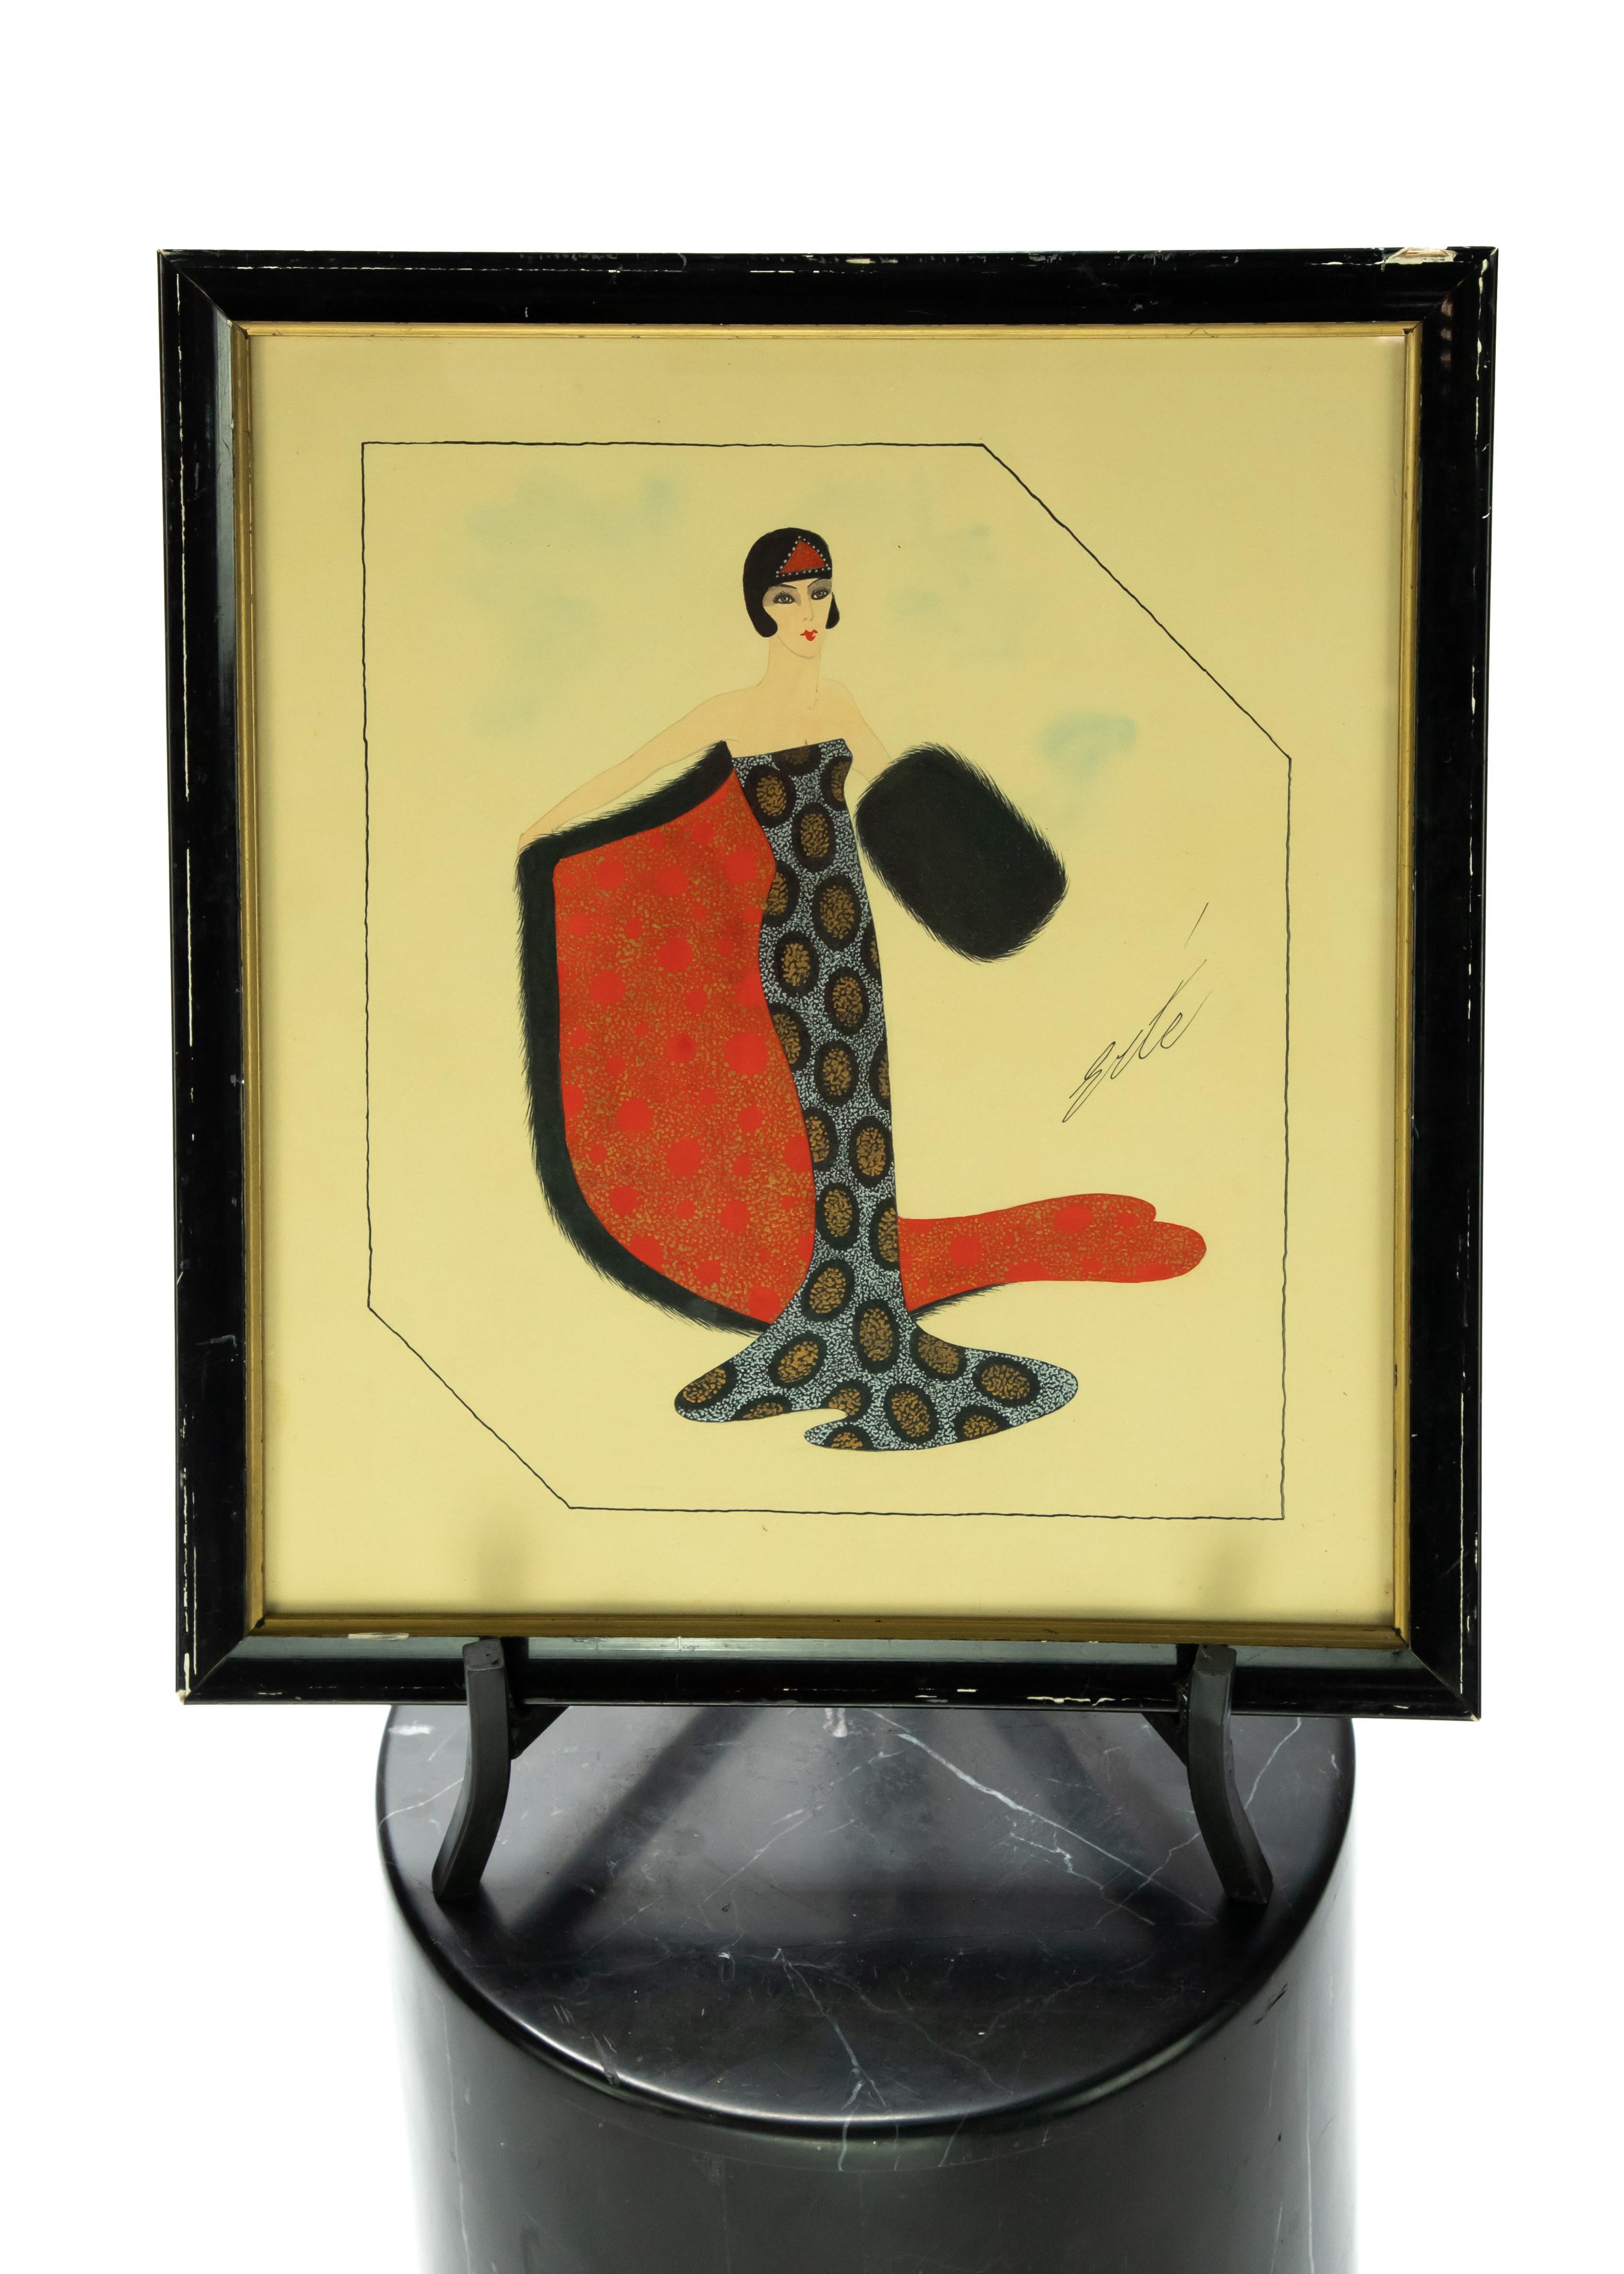 Offering this fabulous Erte' gouache illustration of a stunning woman in a gown. The gown features silver and gold dots in a geometric design. It depicts a cape and muff. The cape is done in a bright red orange color with gold dots accenting. And